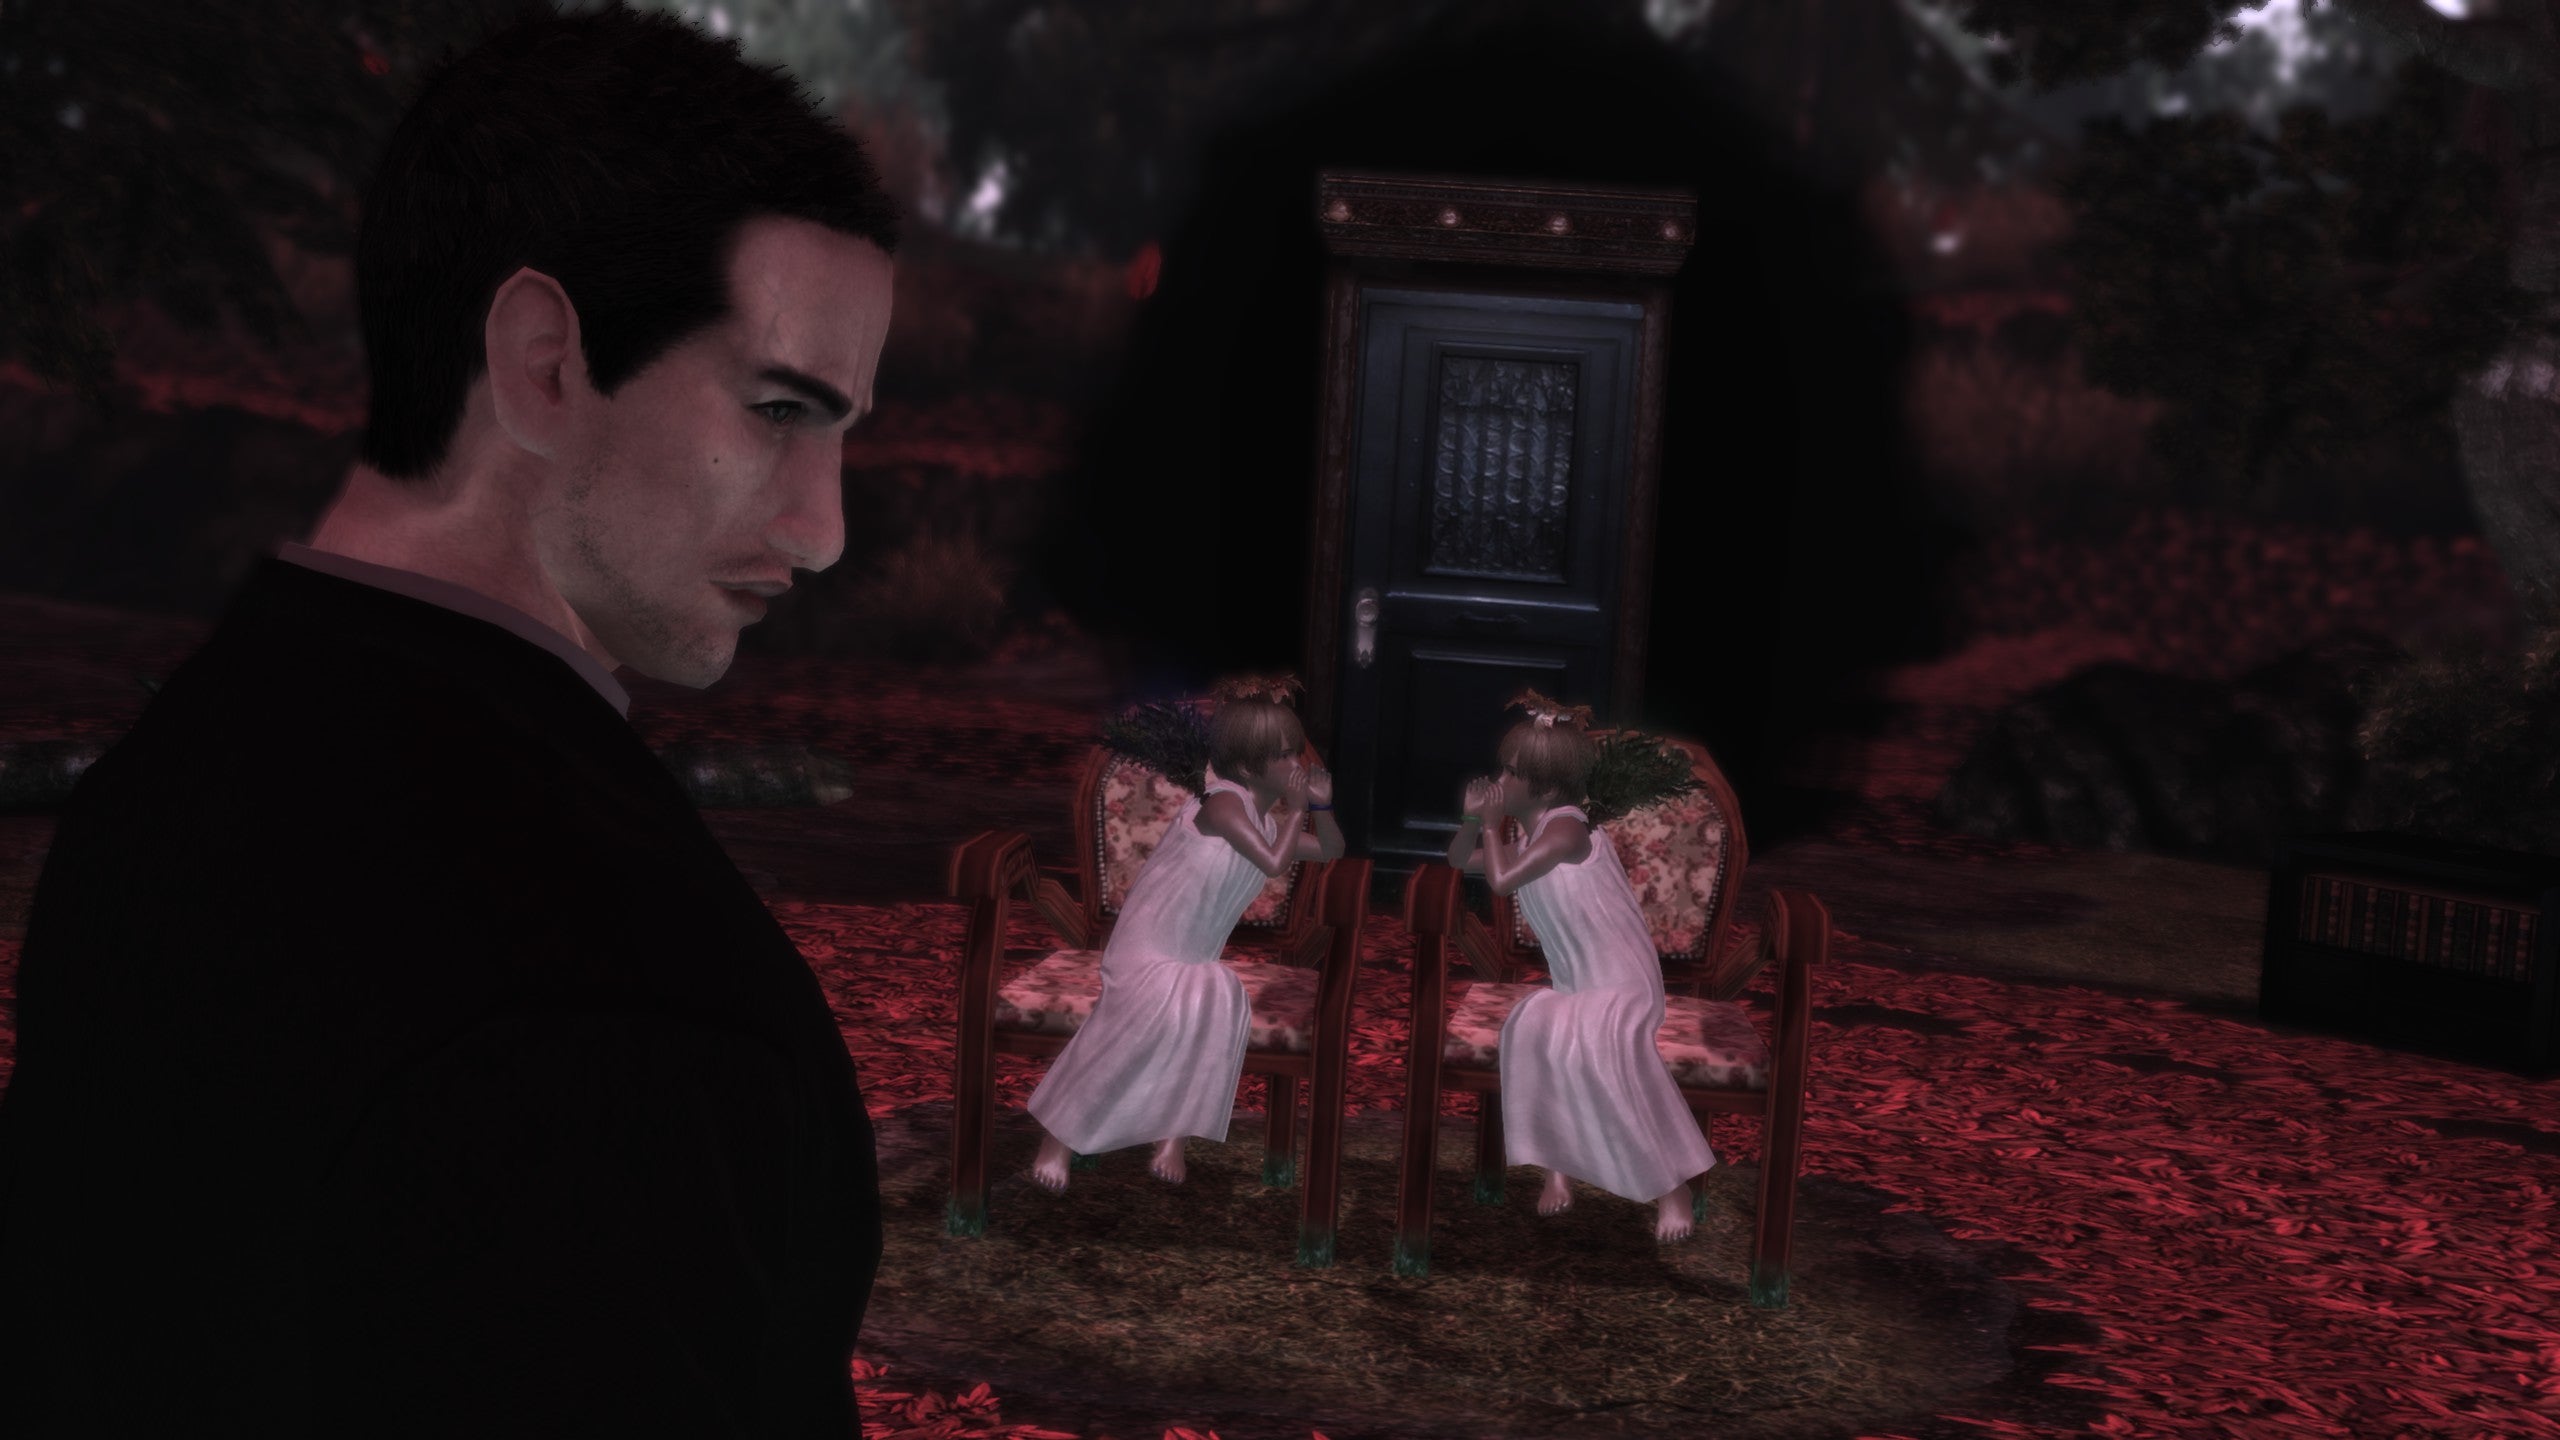 Weird twins whispering in a Deadly Premonition screenshot.